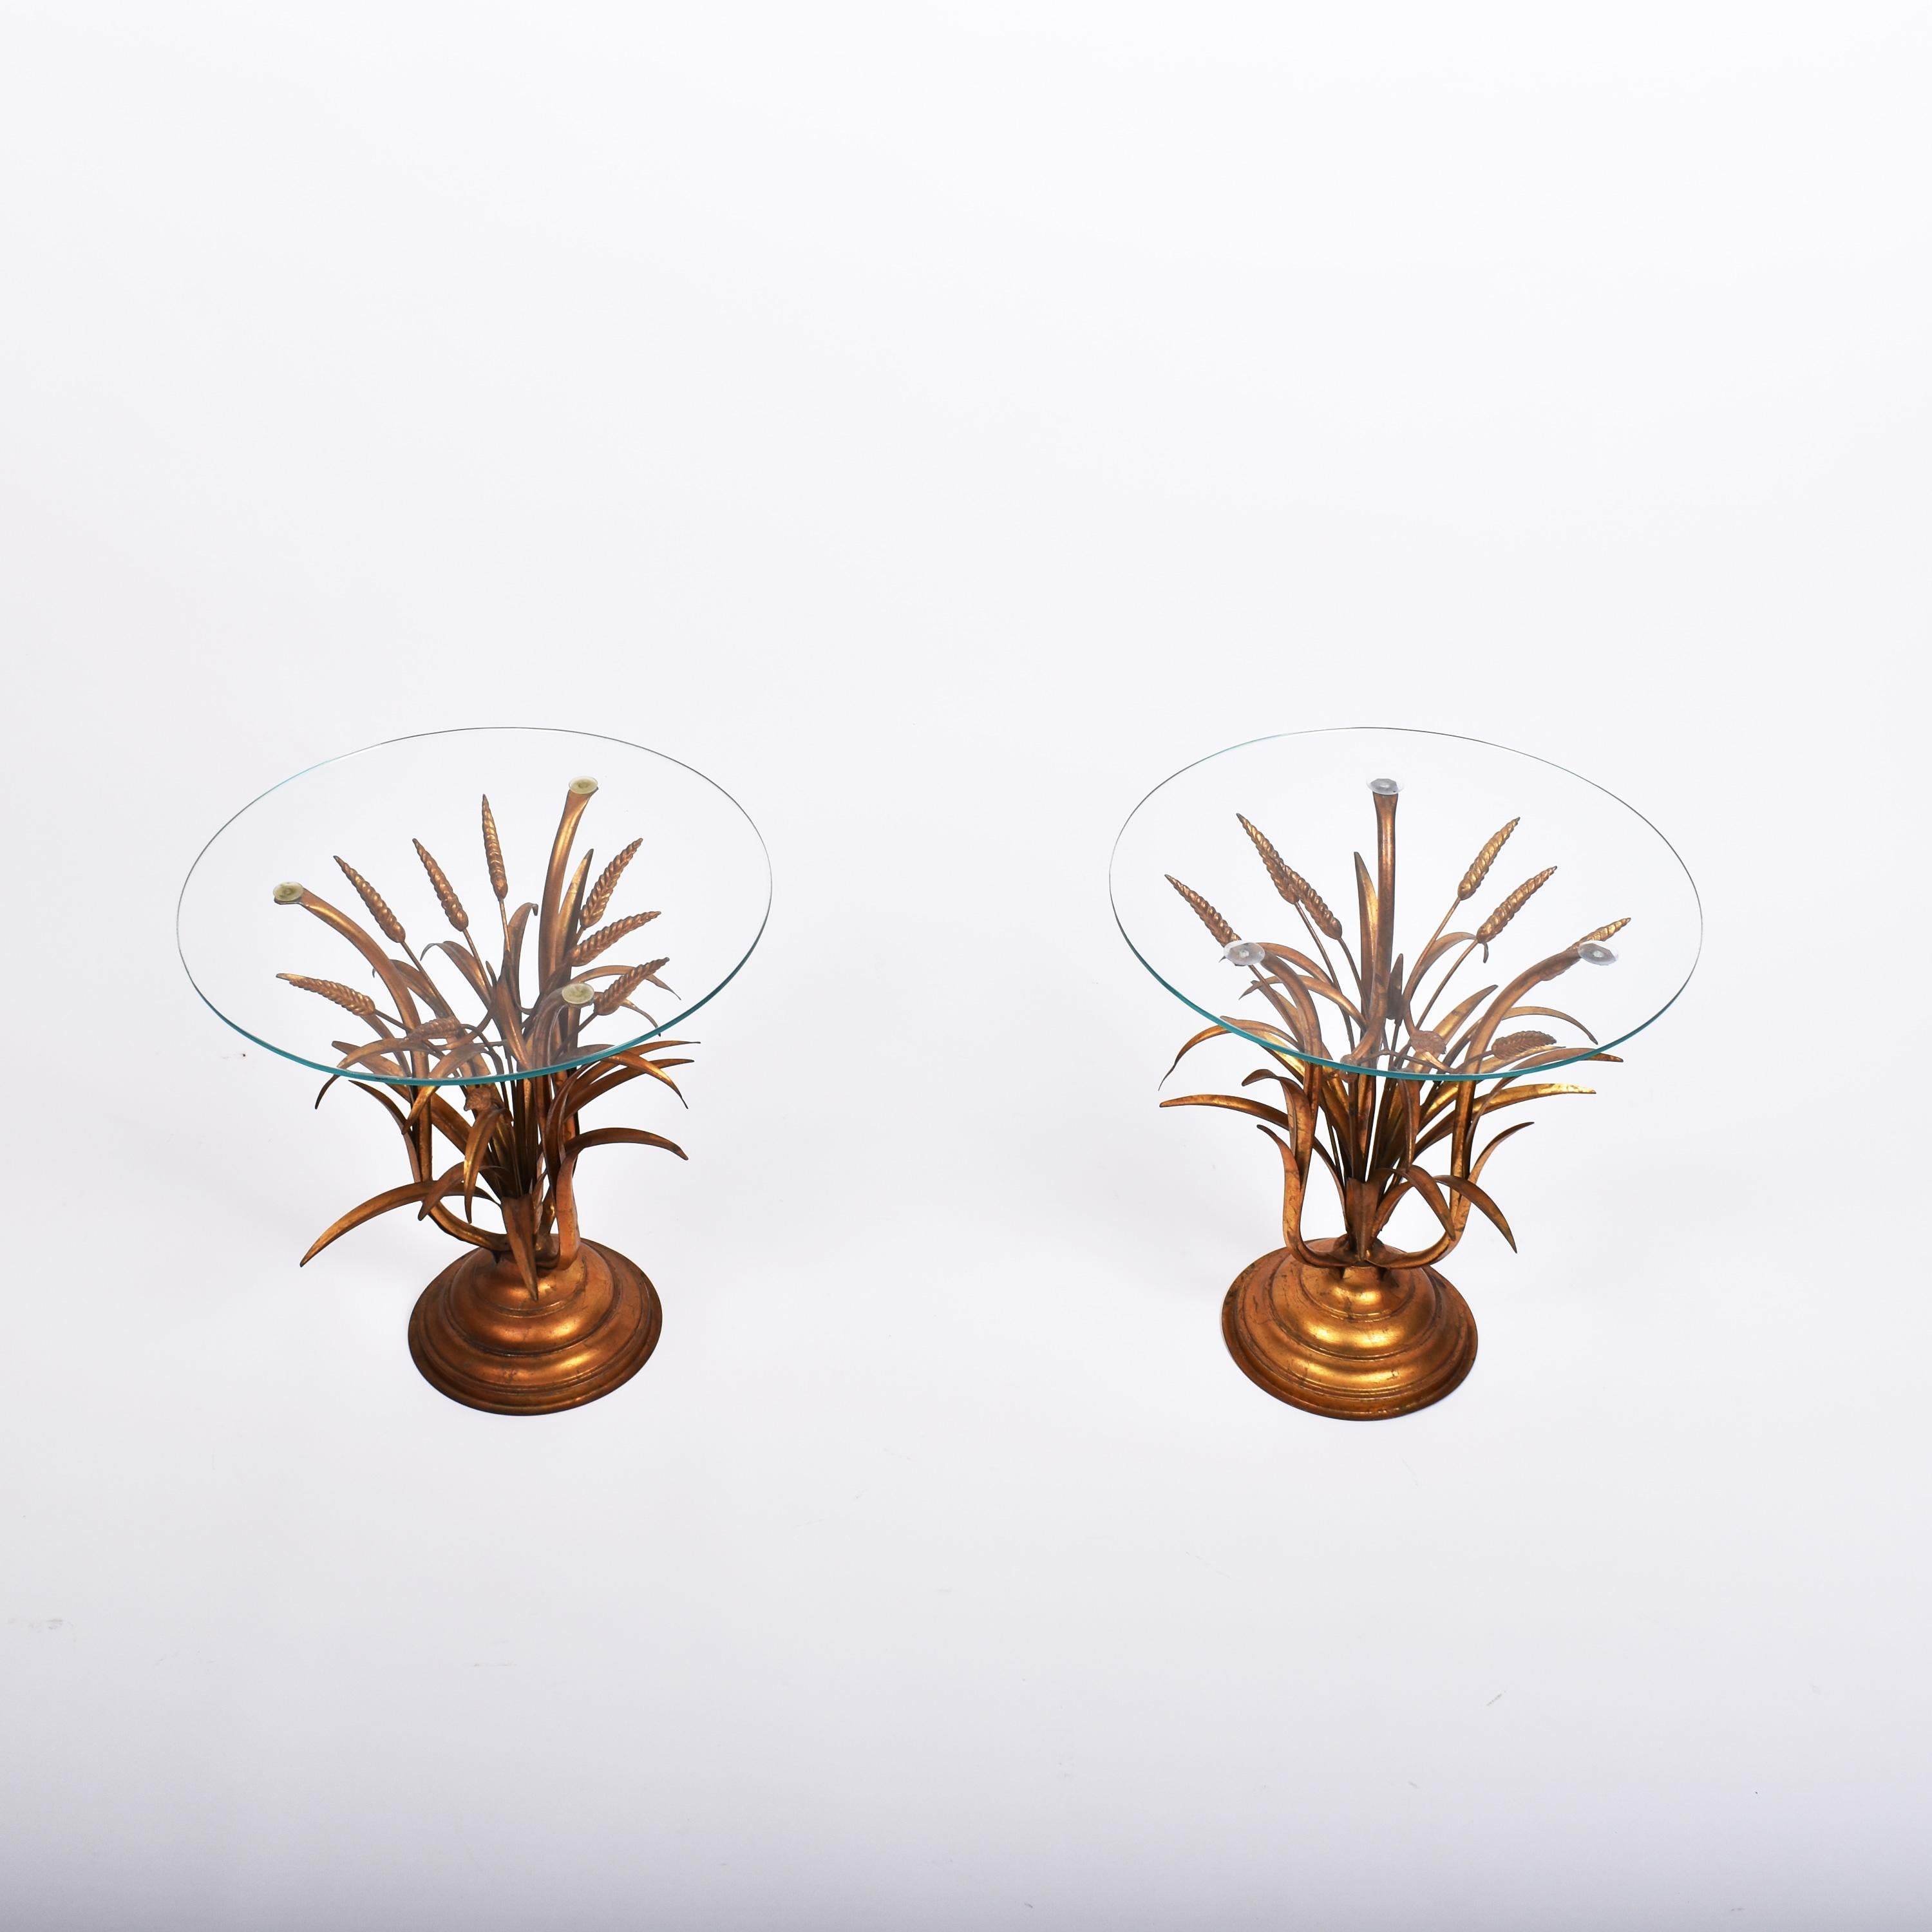 Set of two gilded side tables, made of a bunch of wheat heads and a round glas top.
Typical of the Venetian revival of the seventies, nowadays Hollywood Regency.
These tables are very decorative and light up the surroundings.
Good condition, nice